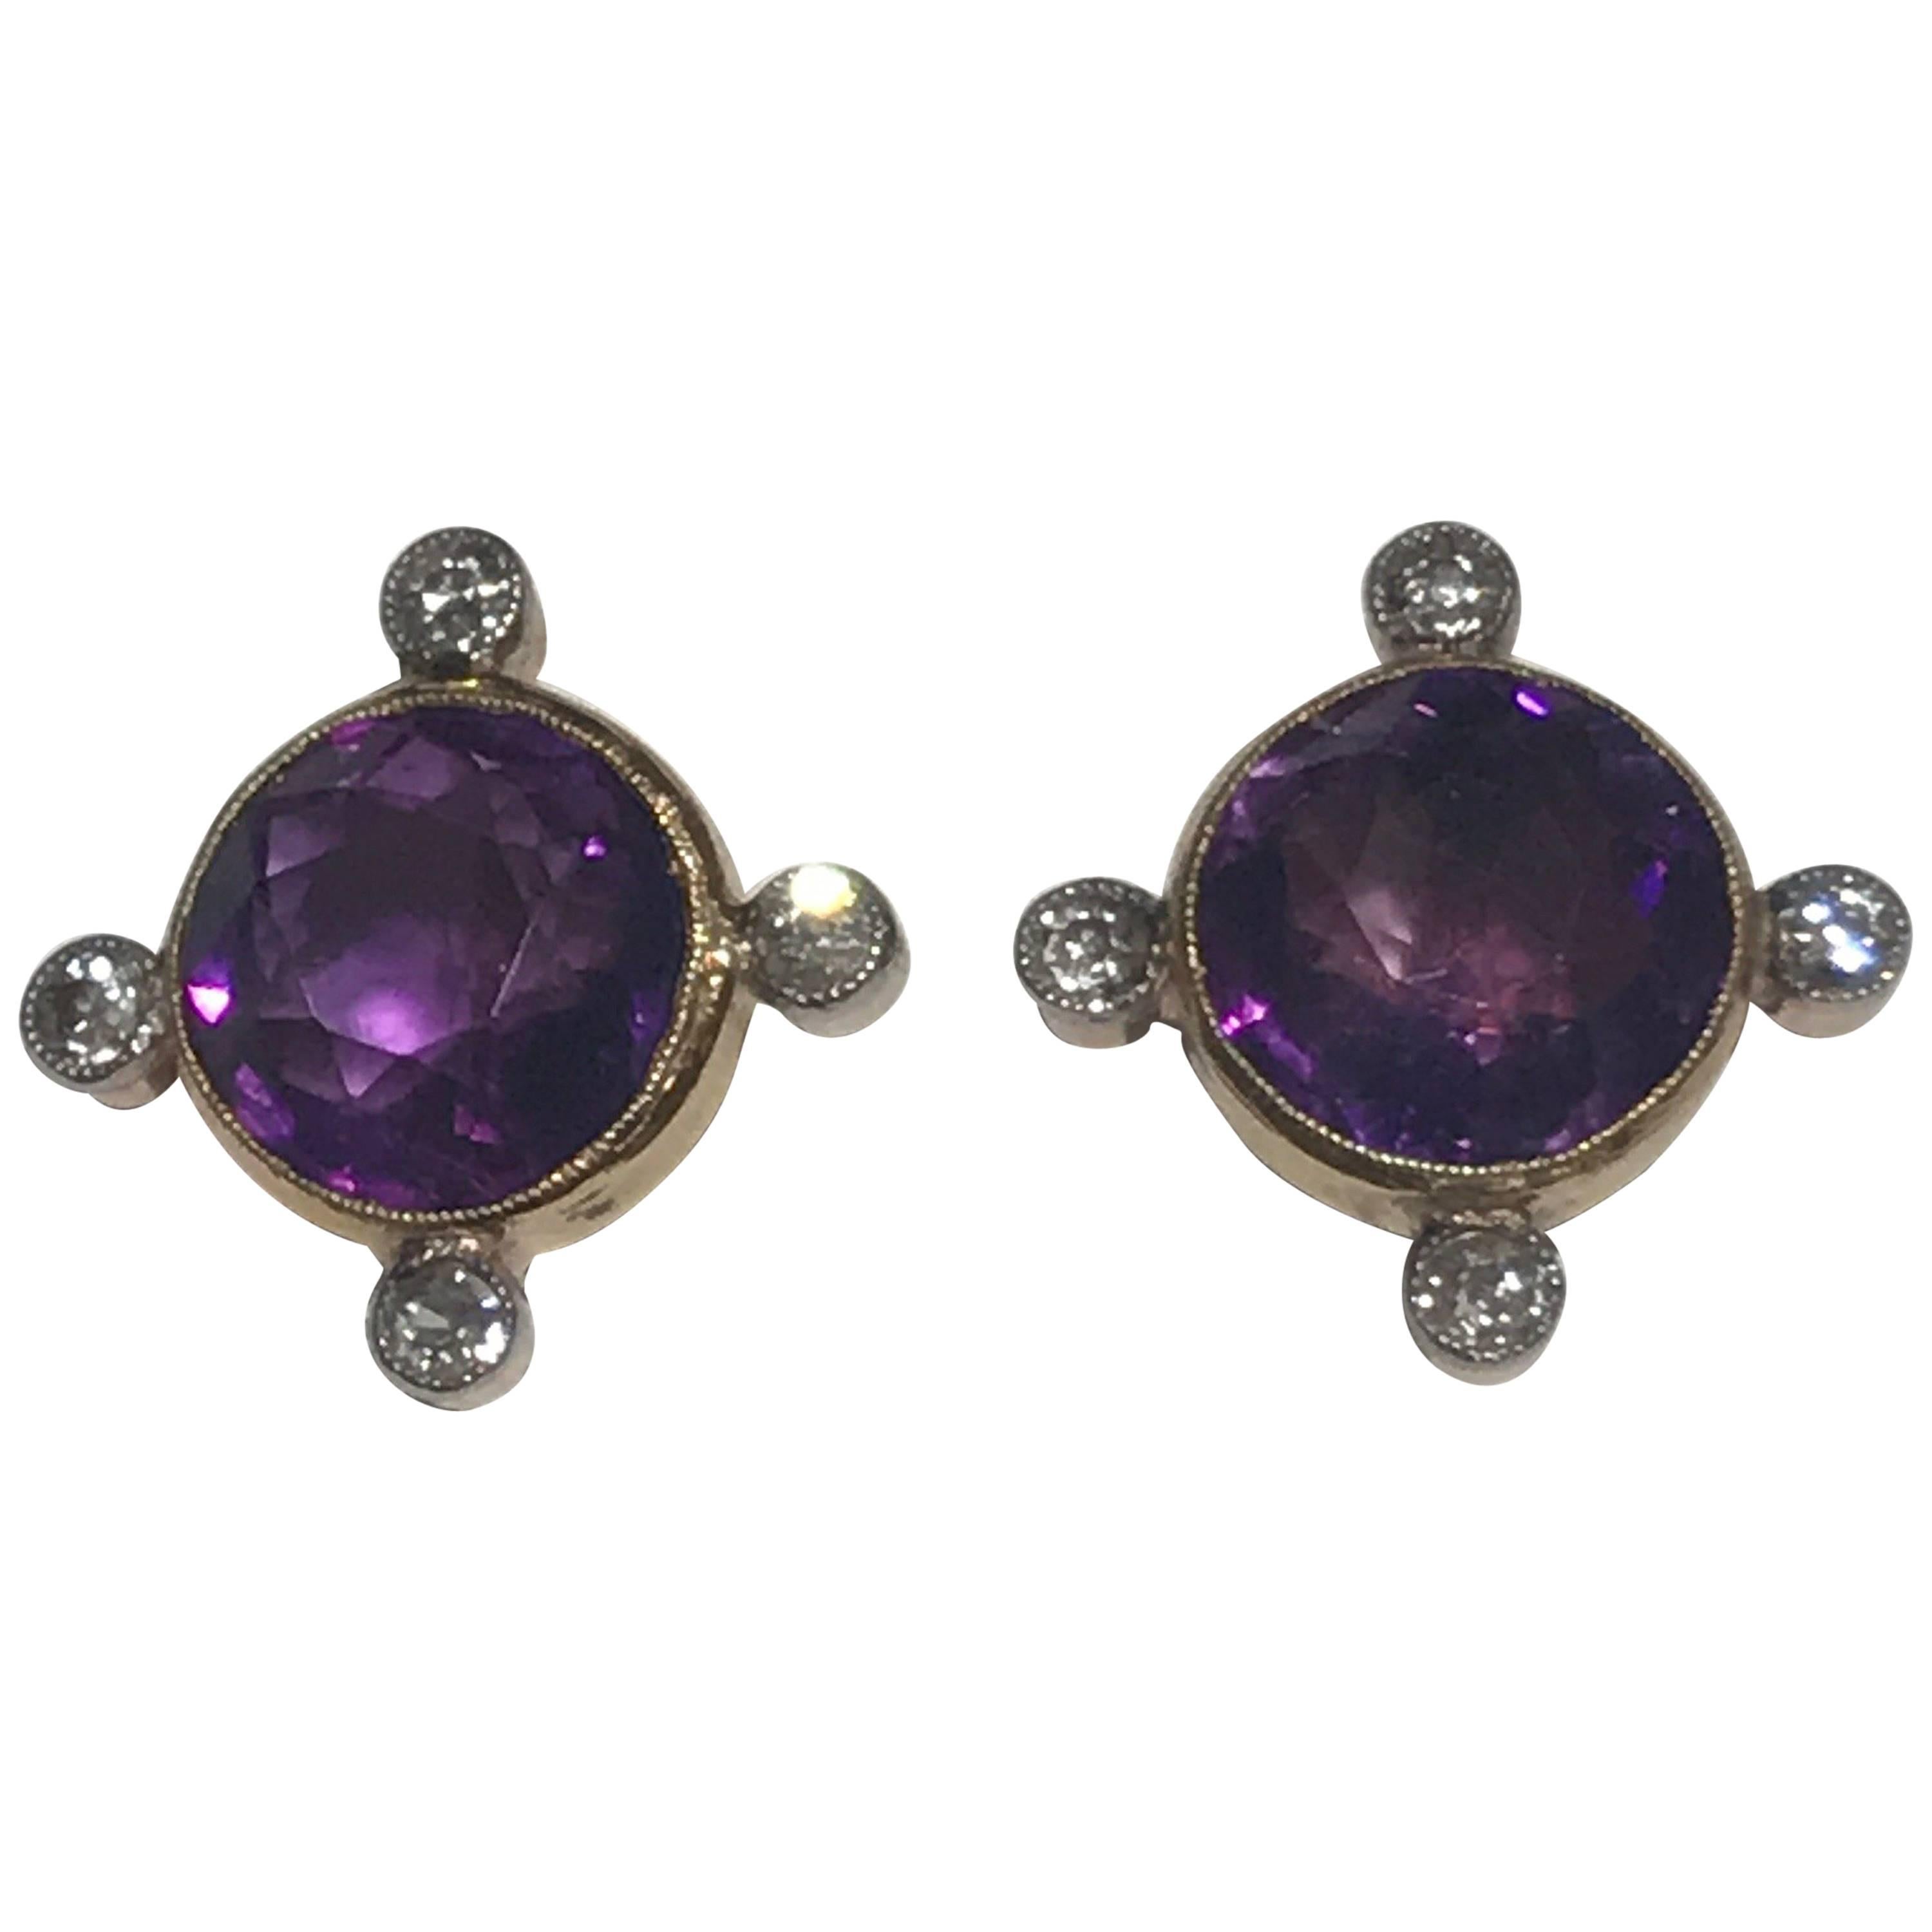 A pair of antique amethyst and old cut diamond earrings, previously were screw backs, however they have been converted for pierced ears.  They were previously marked for 9k on the screw backs as can be seen on the additional images. They are fairly